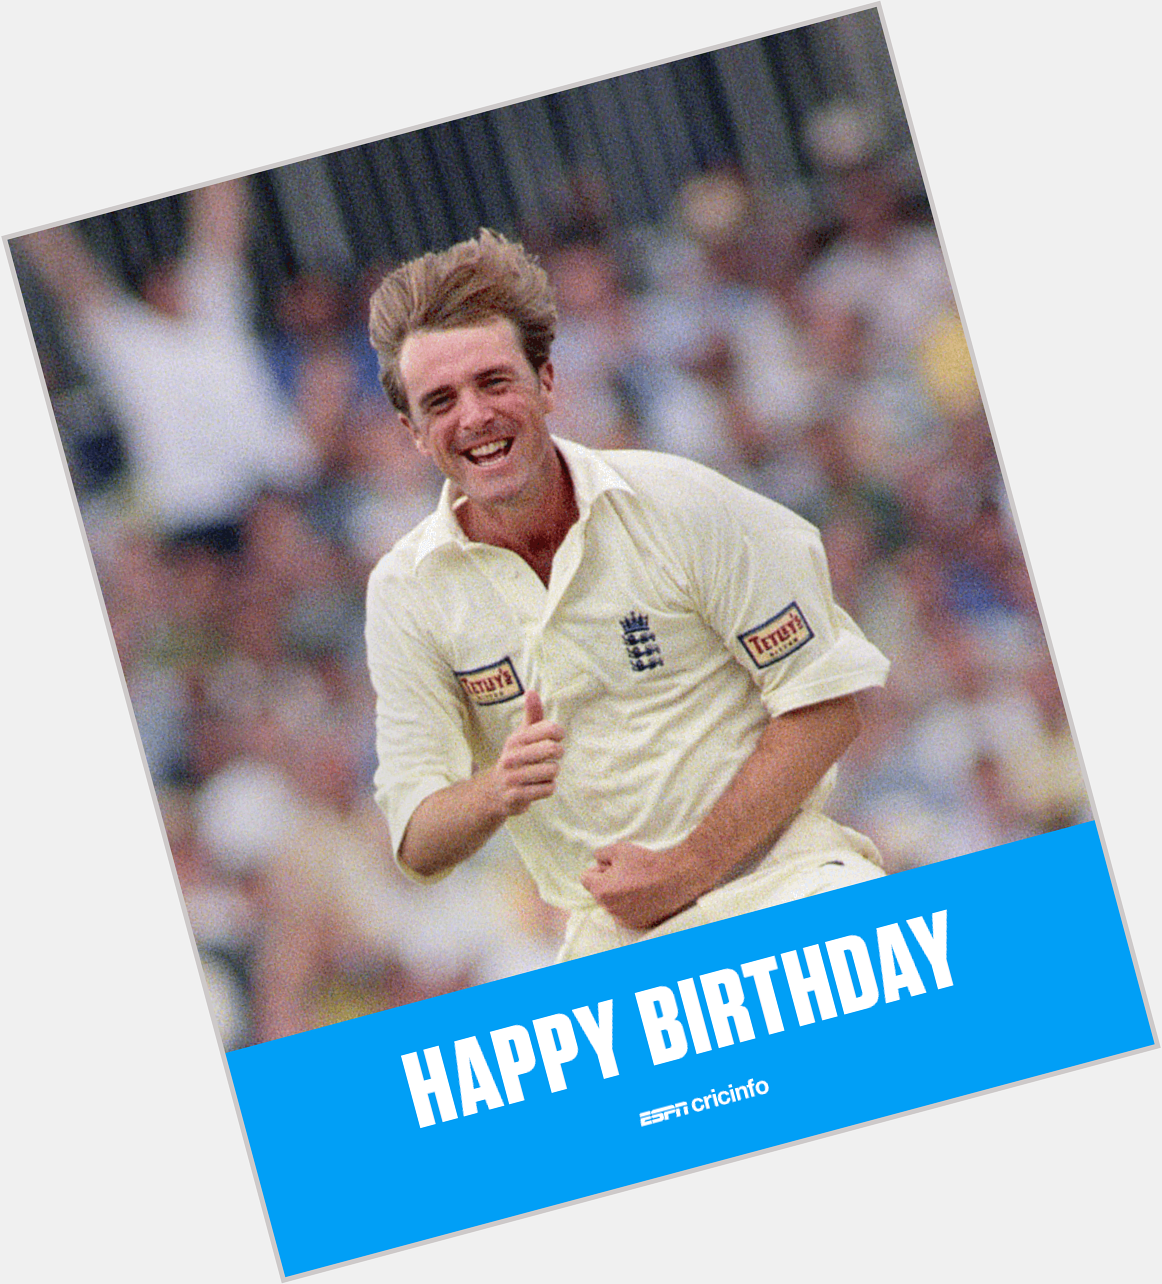  Happy birthday to Phil Tufnell, England\s best spinner in the 1990s! 

 